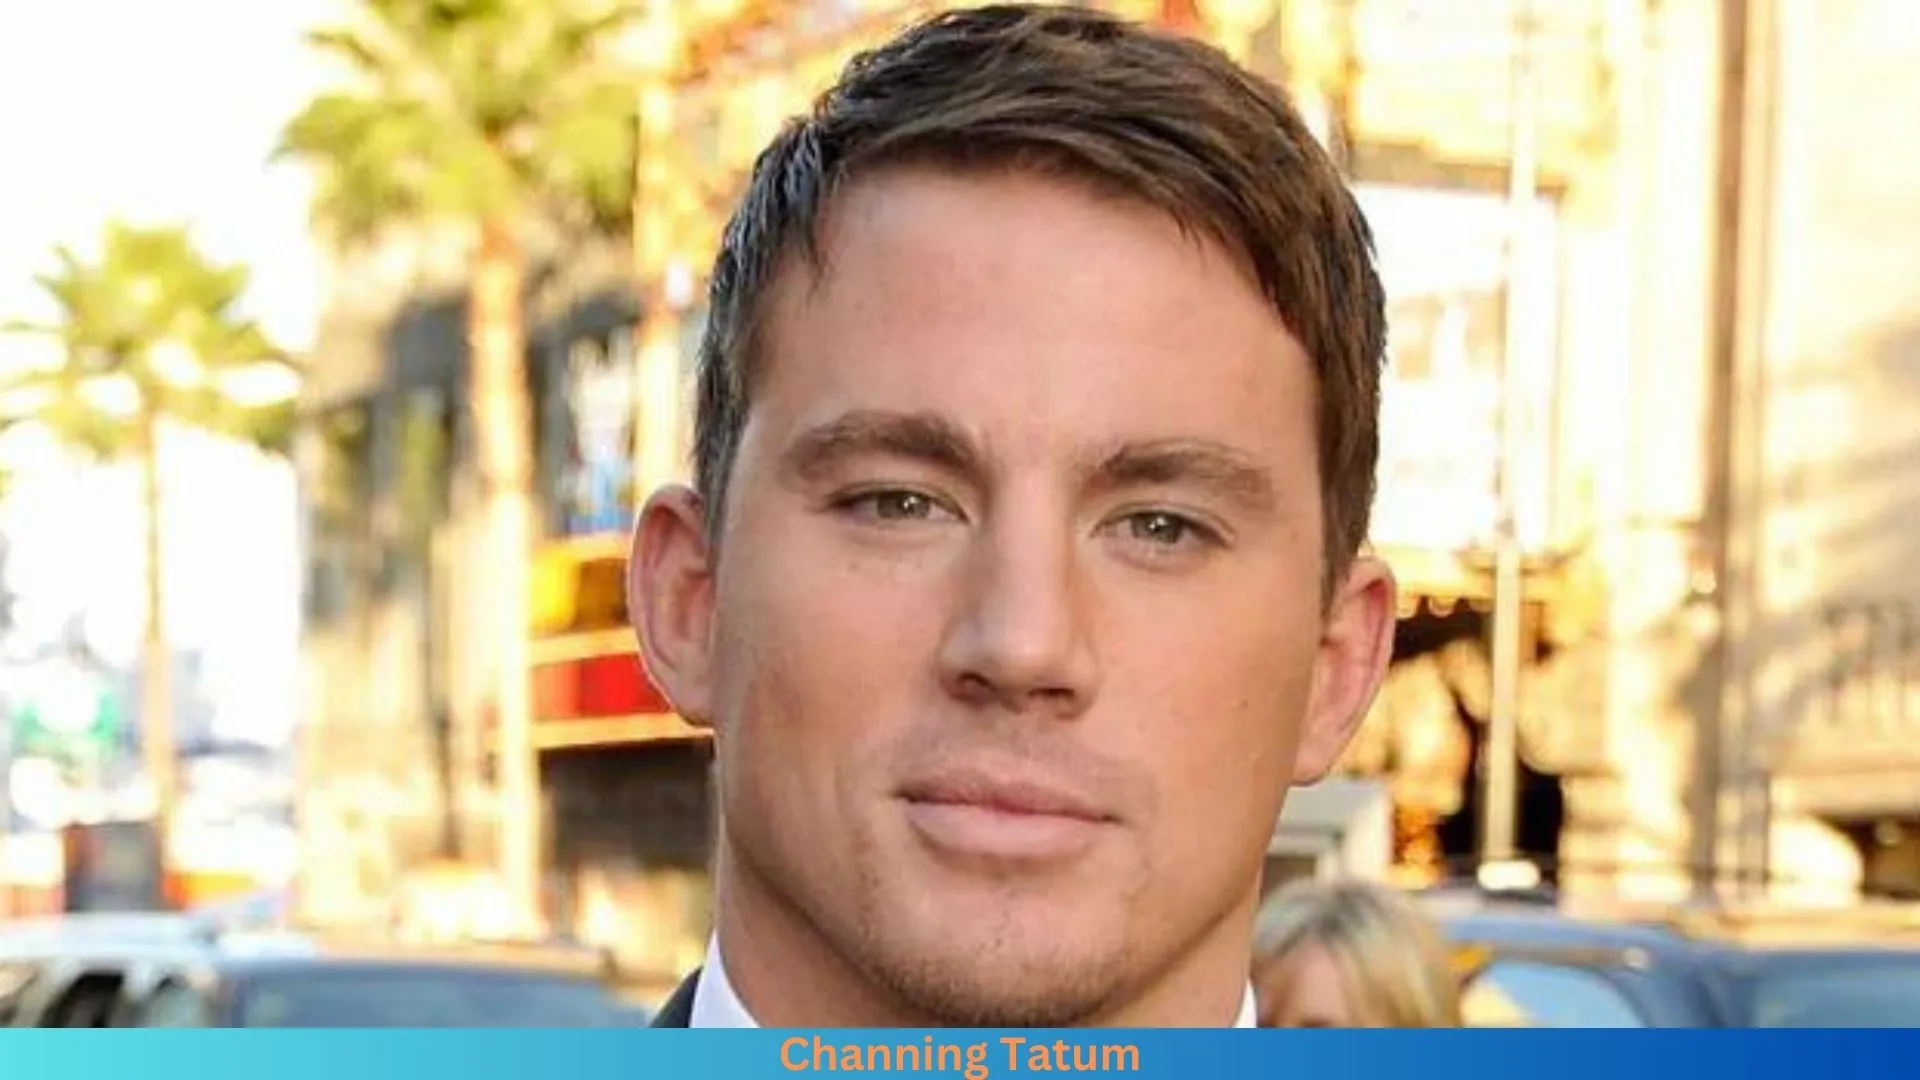 What is the Net Worth of Channing Tatum?